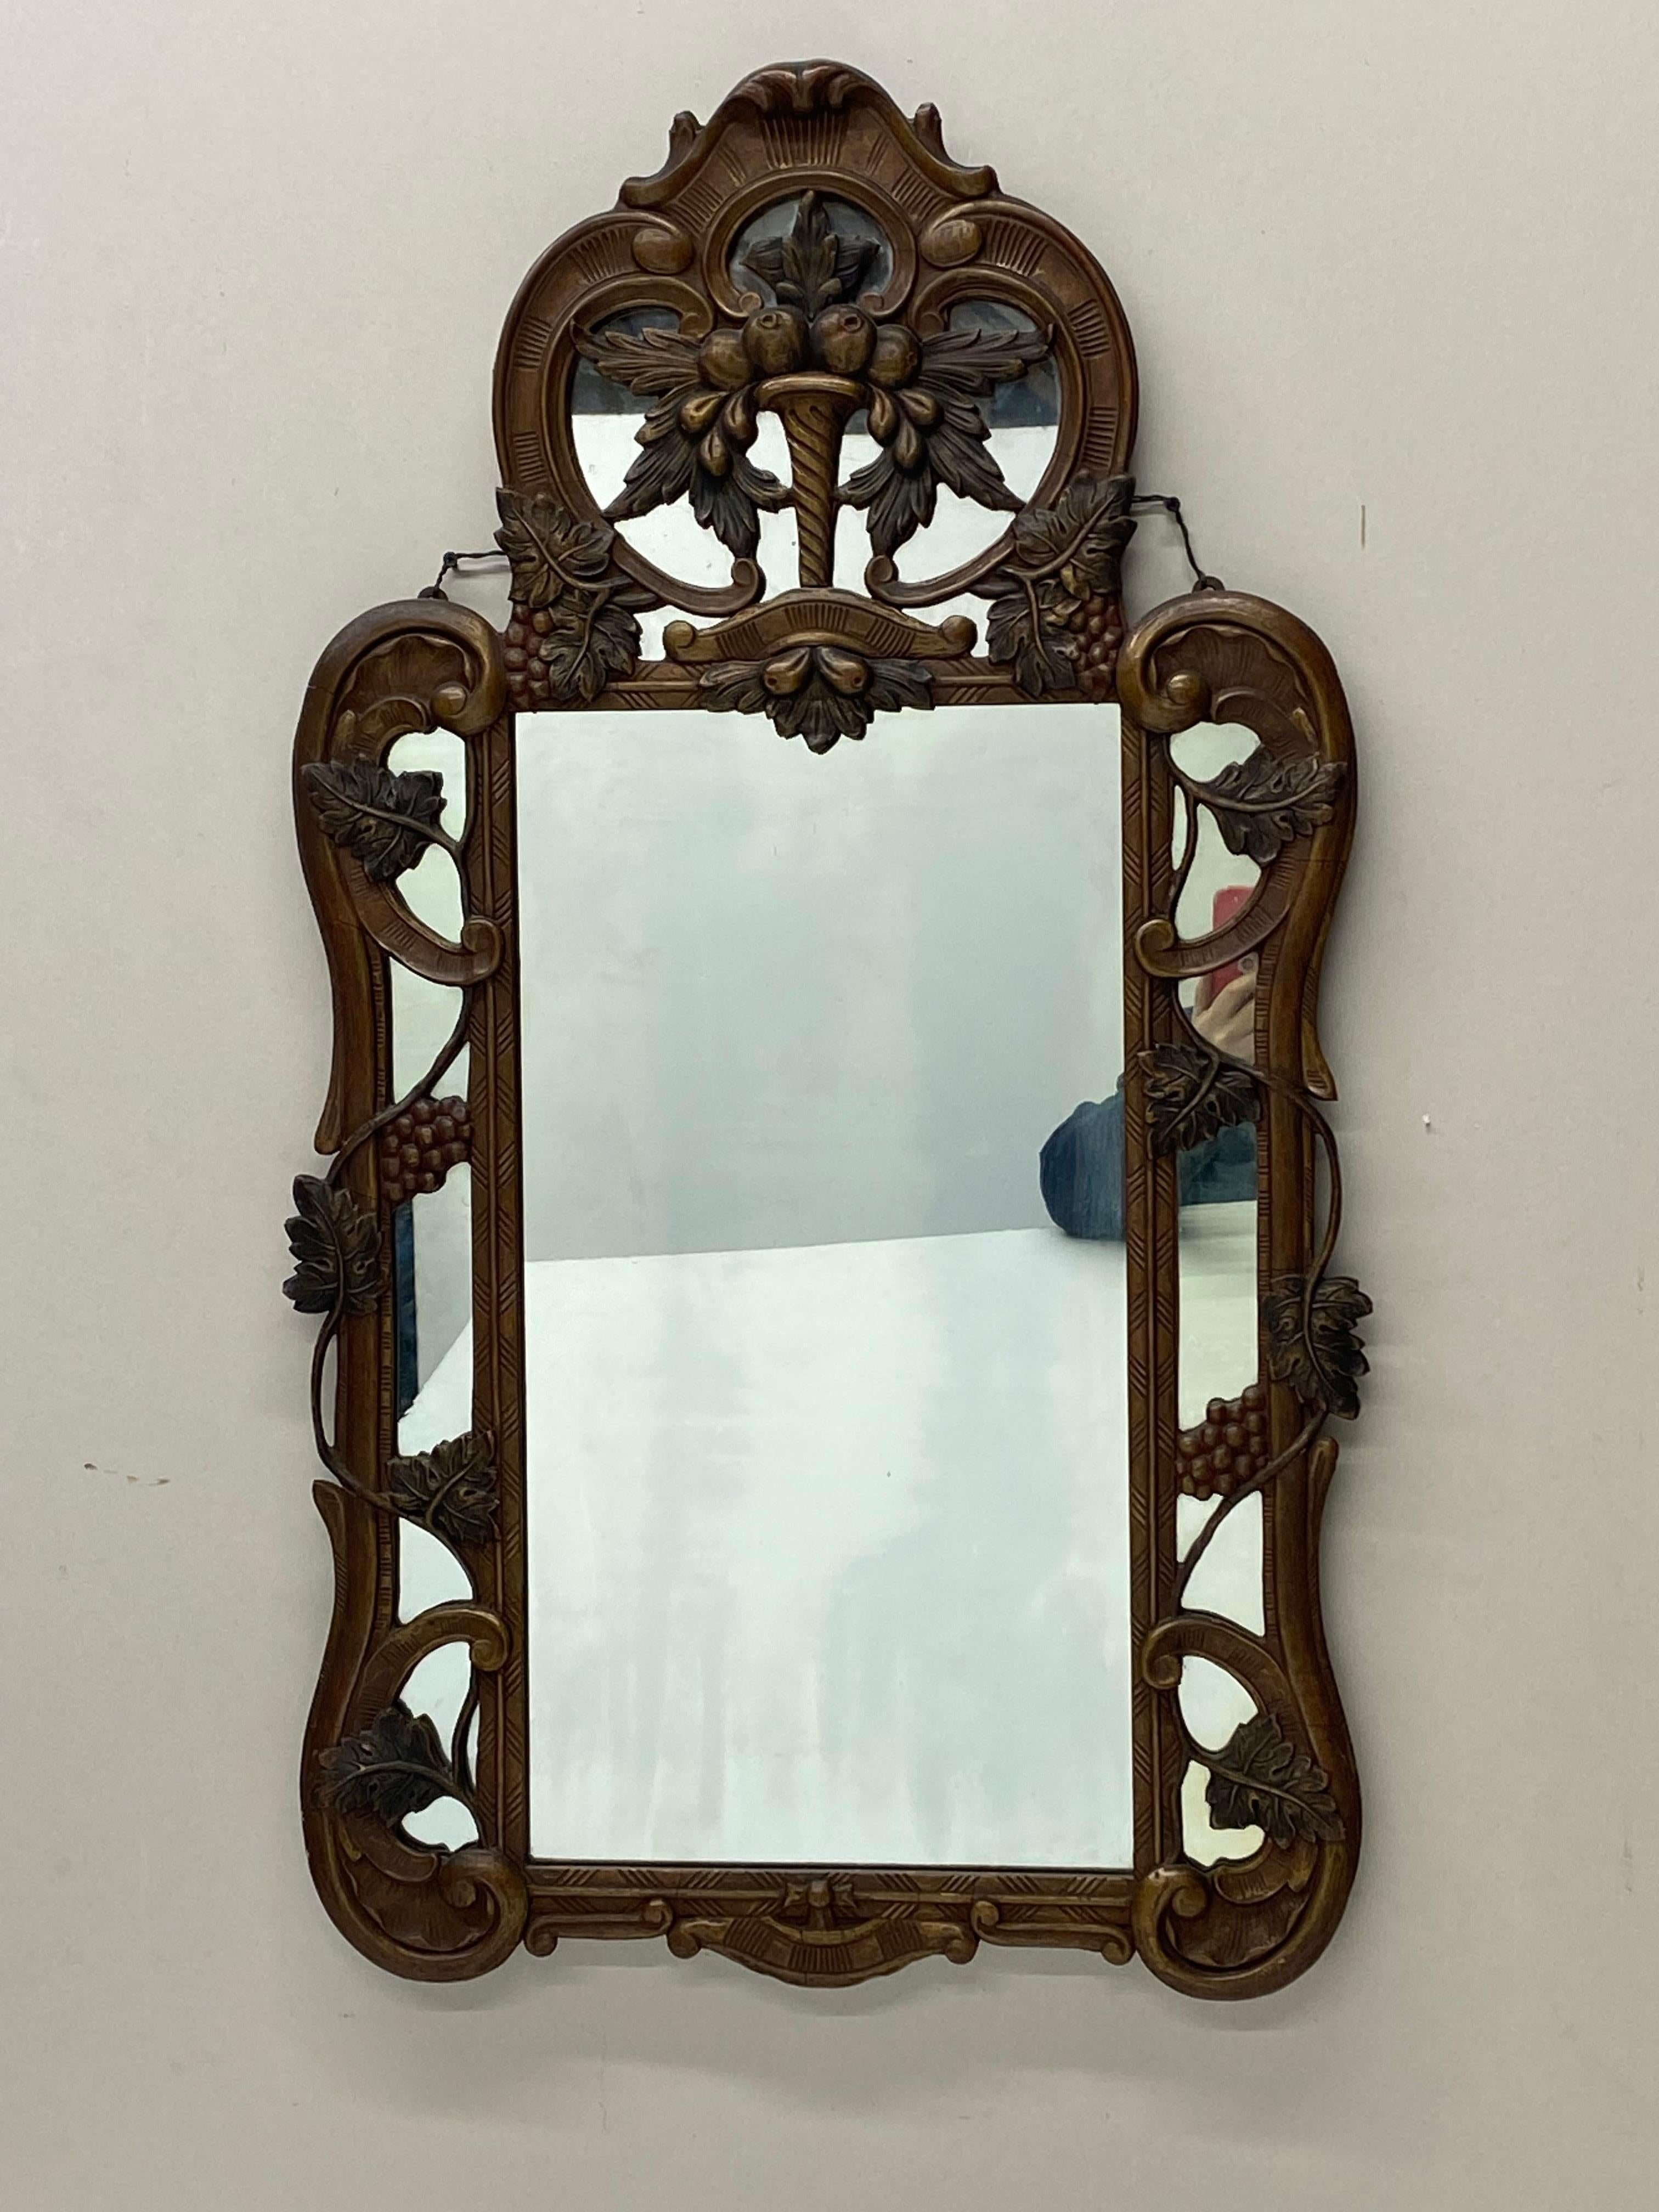 Gesso and Wood Wall Mirror with Grape motif and atop Cornucopia design.  Gesso and paint in very nice shape!  Wood sub-frame is very solid and stable.  Nice scale!  One of the nicer of this style I have seen!